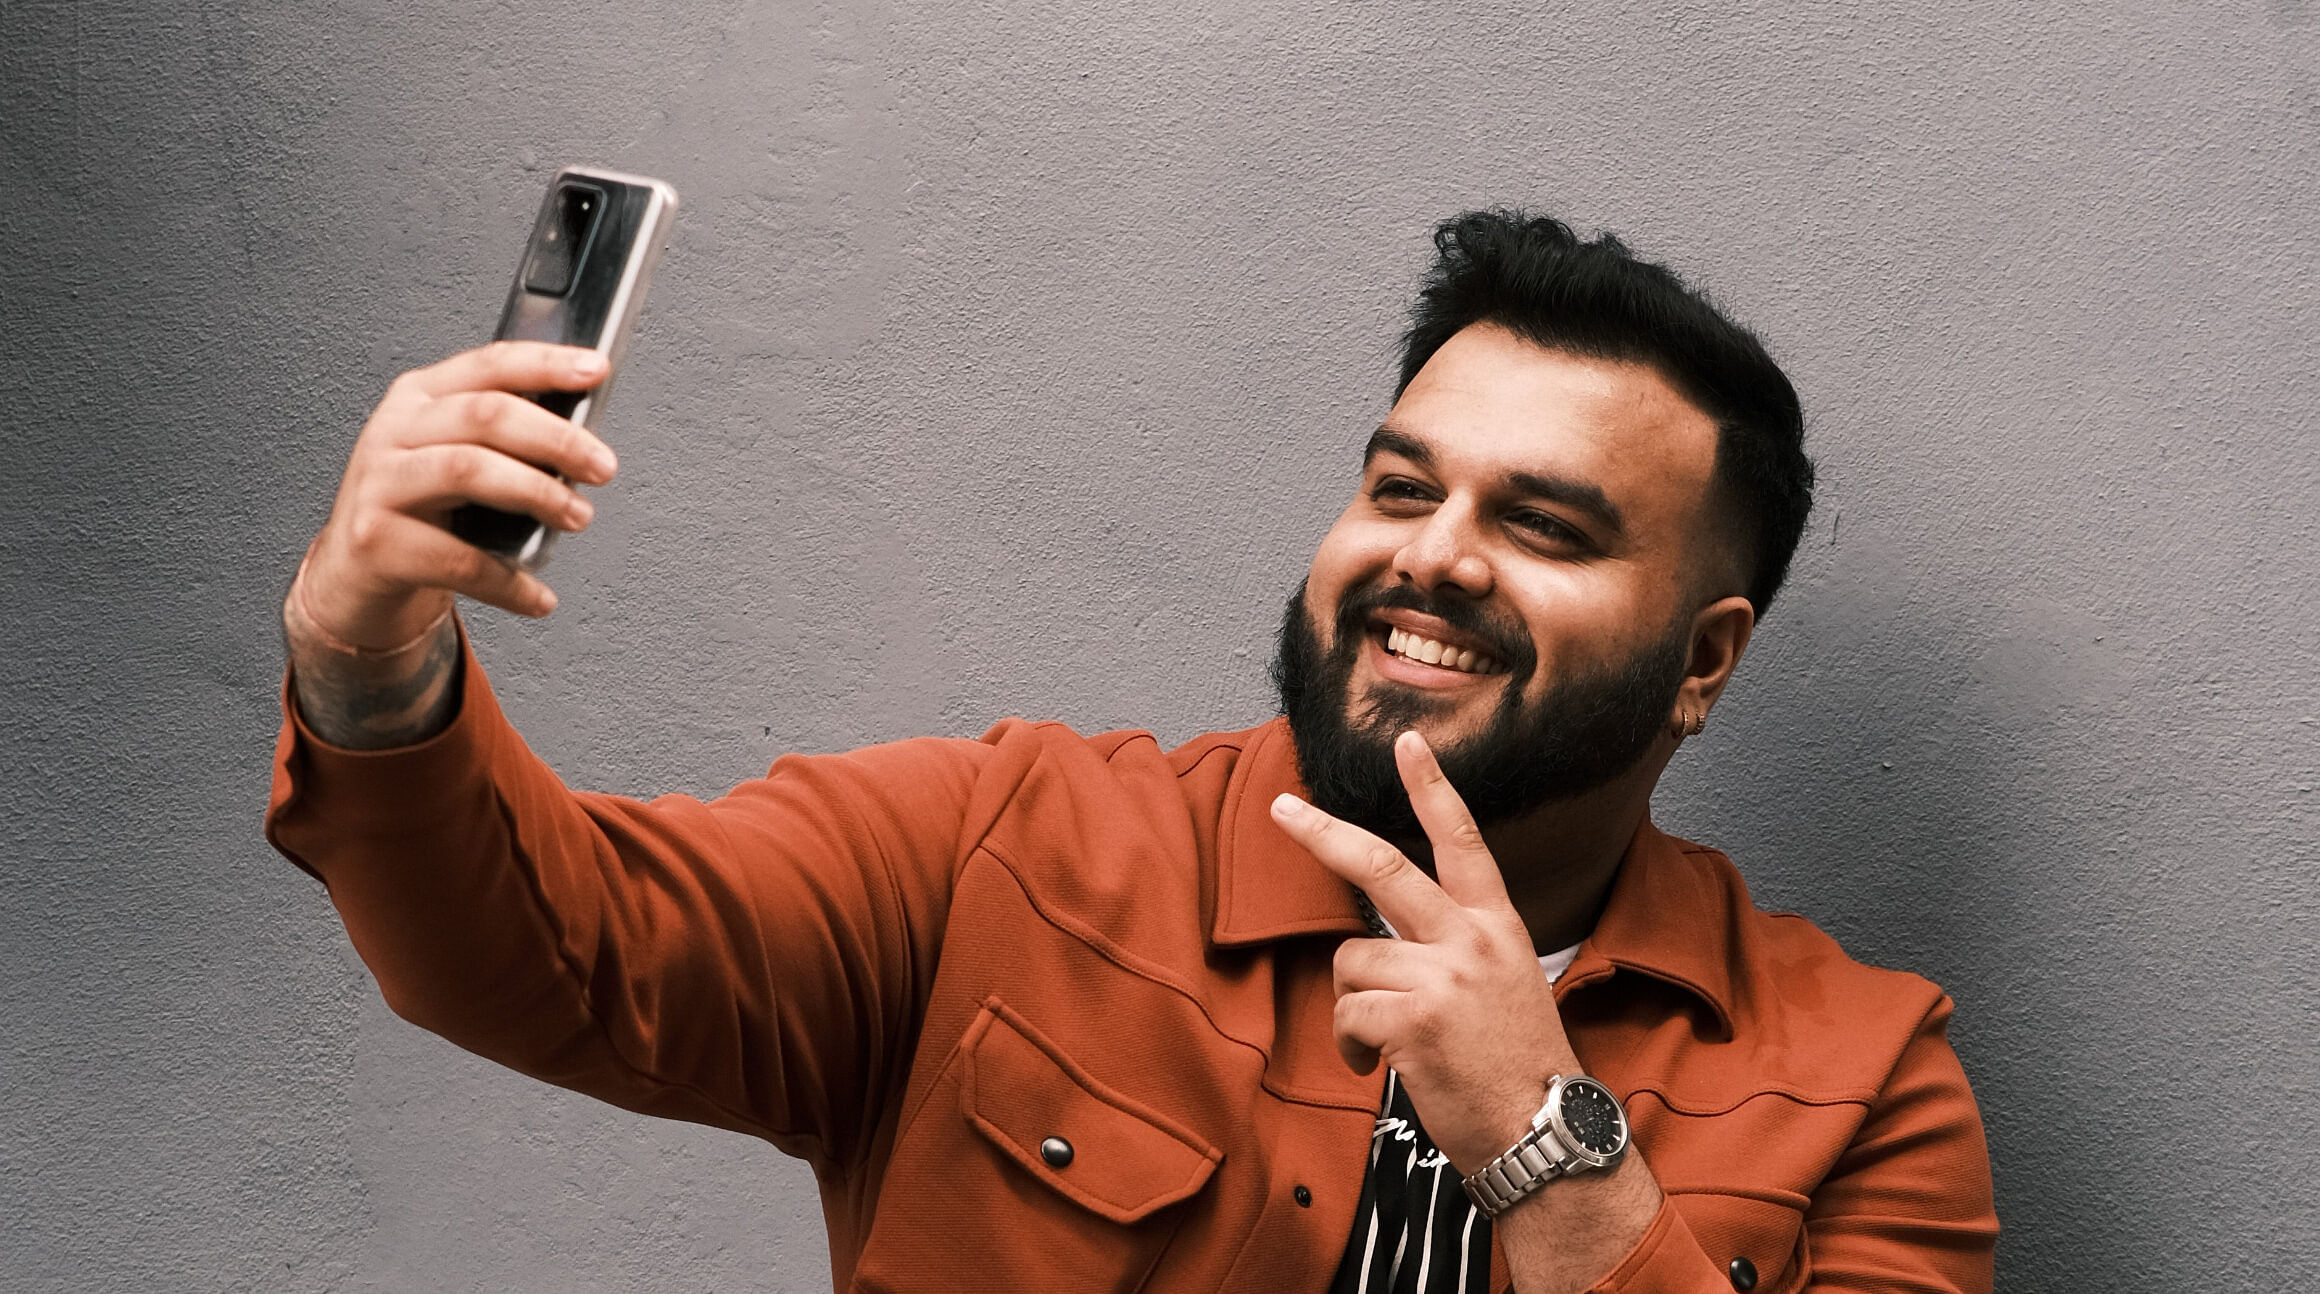 man taking a selfie with a smartphone